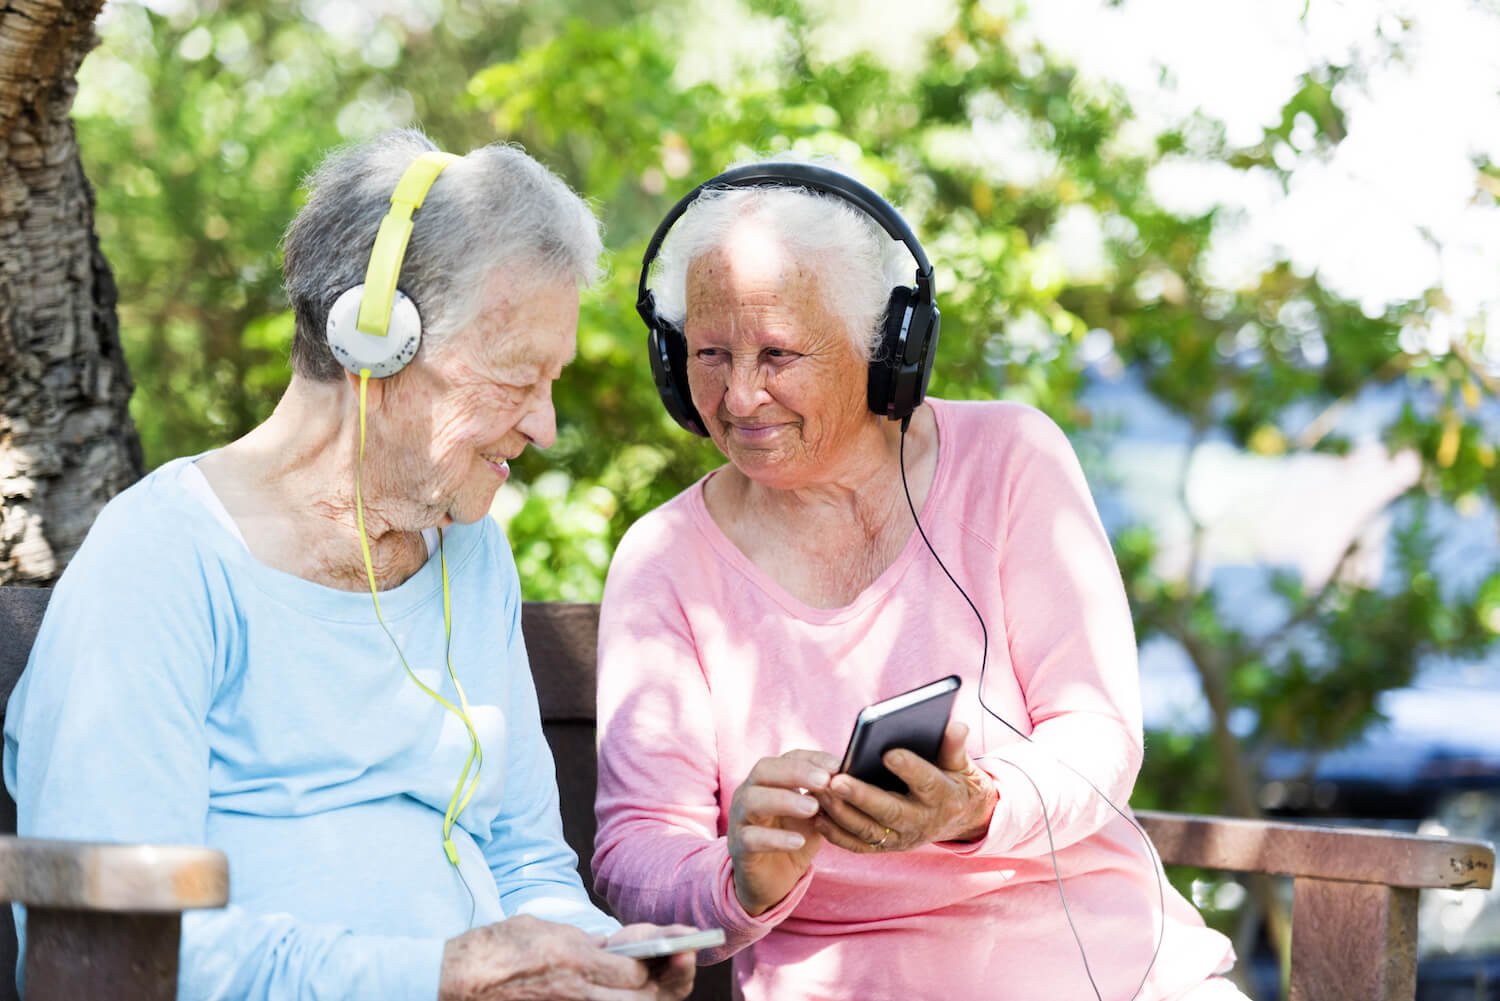 Senior women listening to music together on a park bench